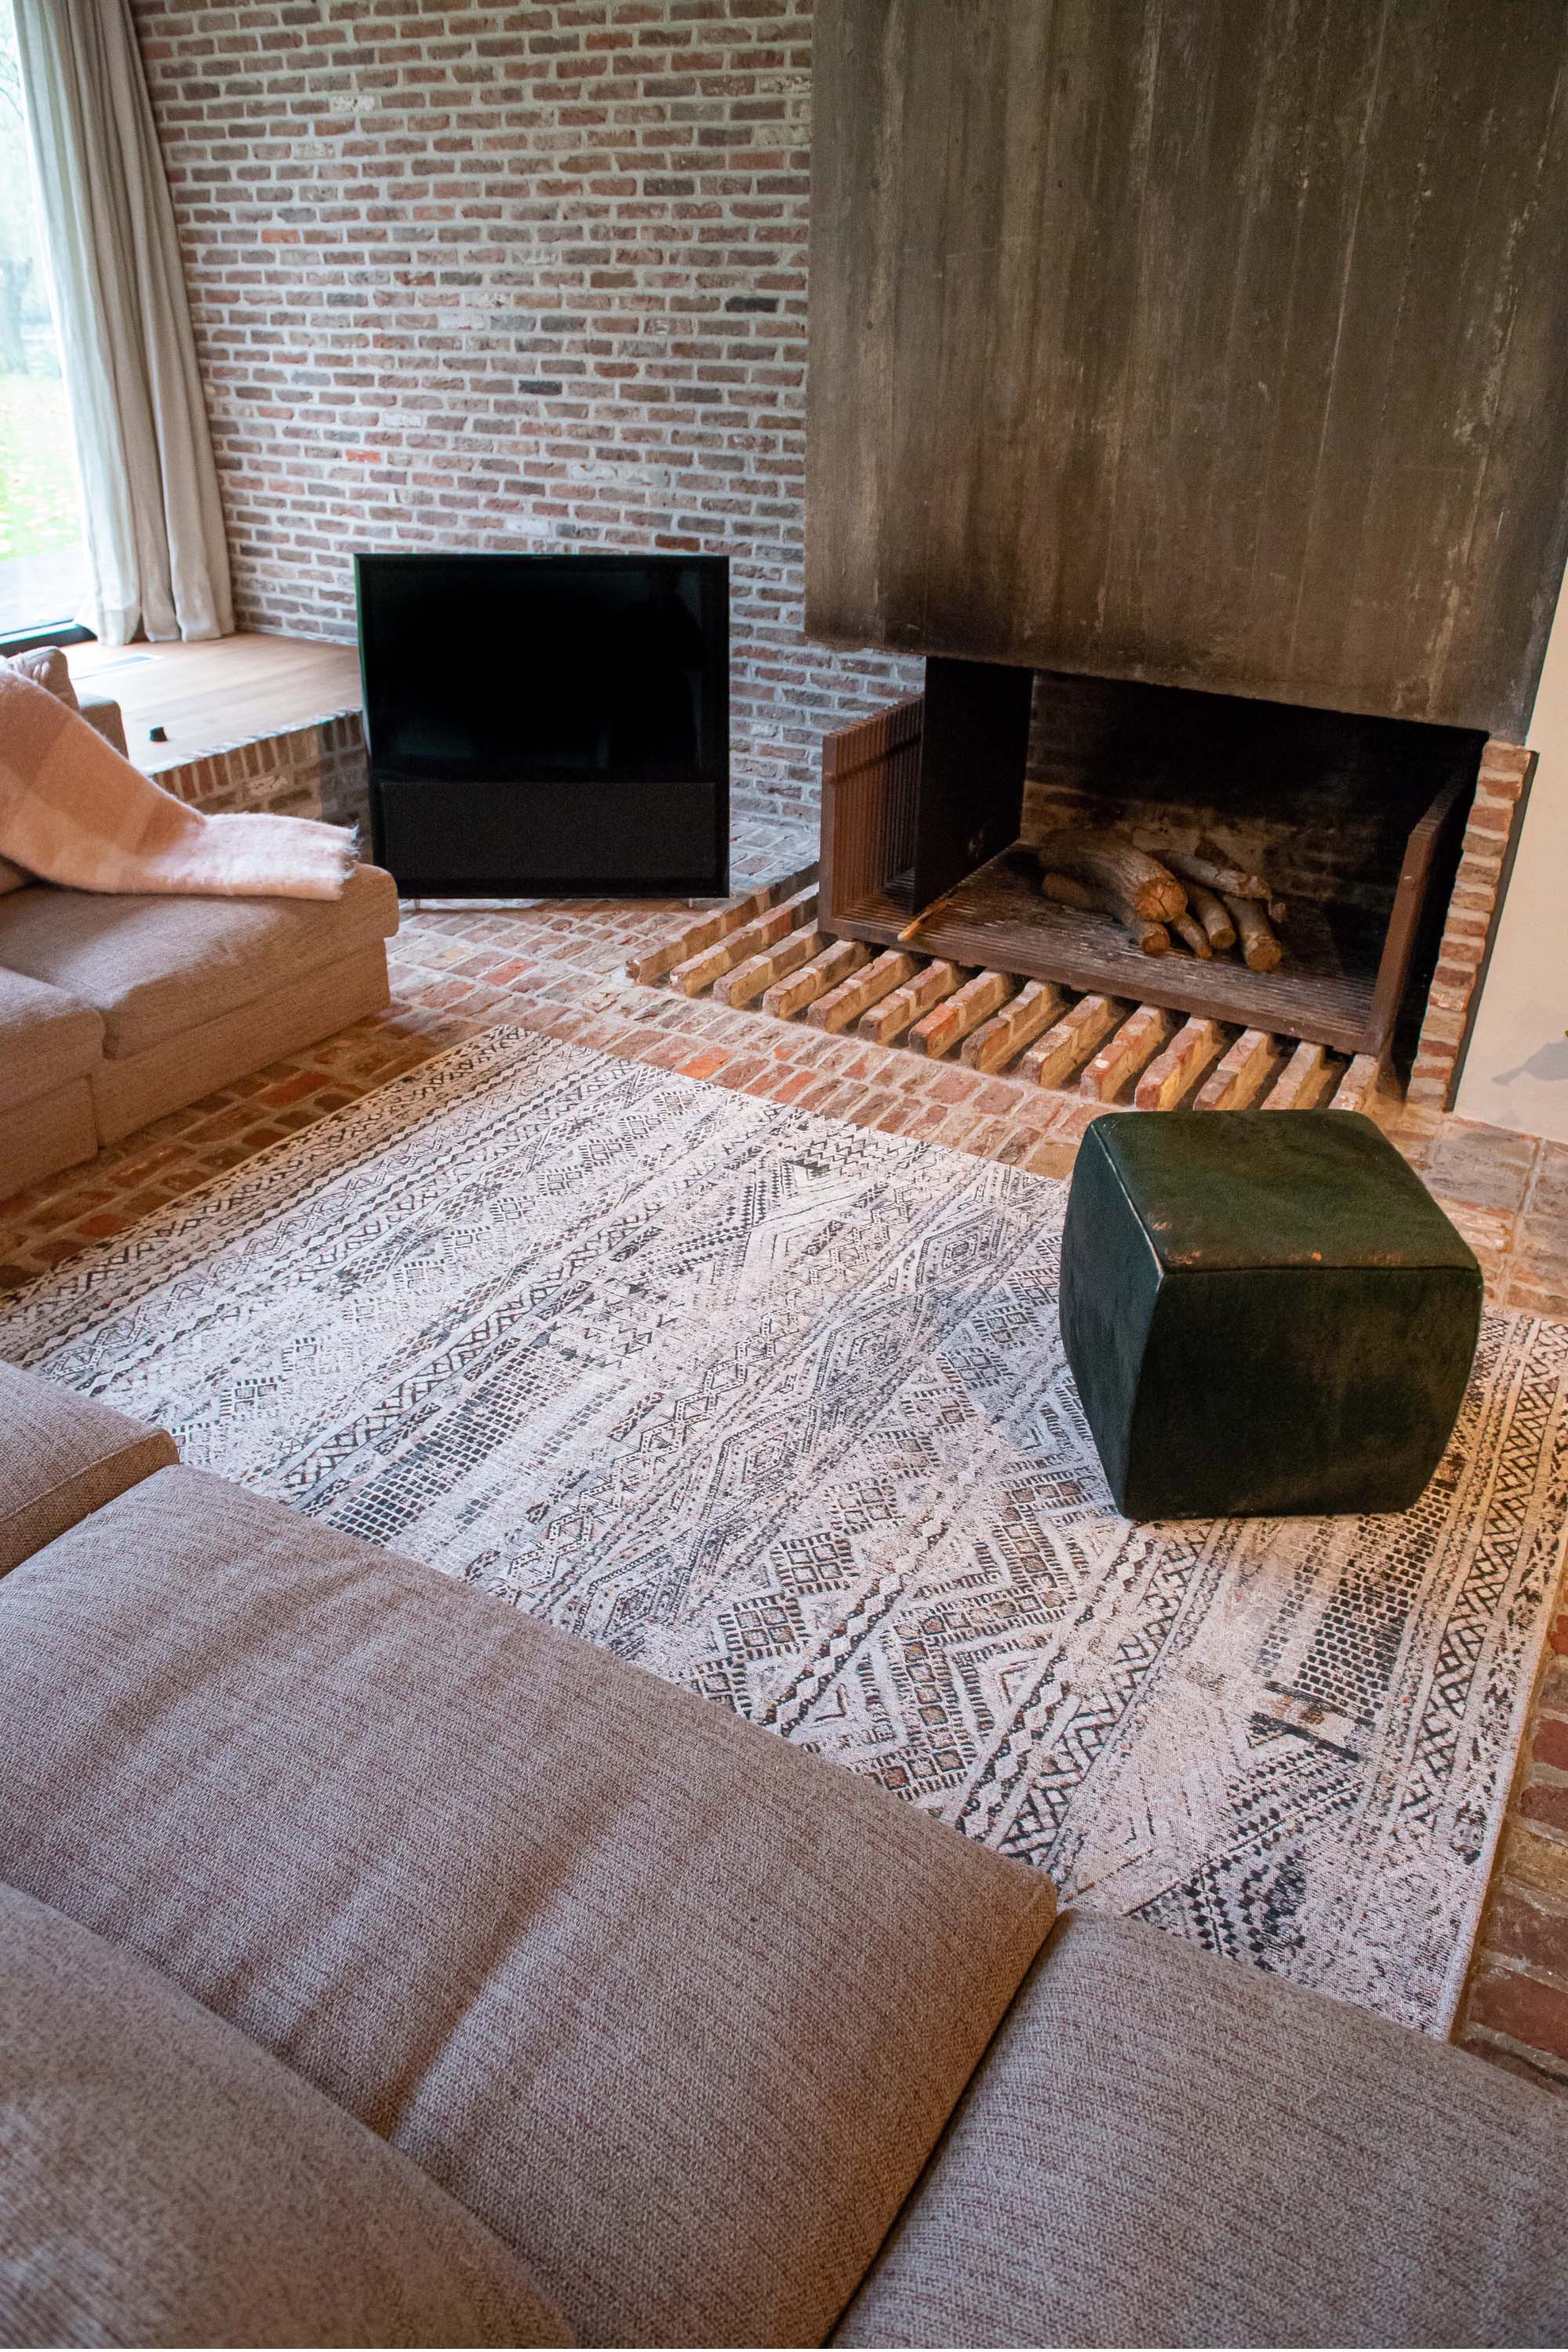 cream rug with a moroccan geometric pattern